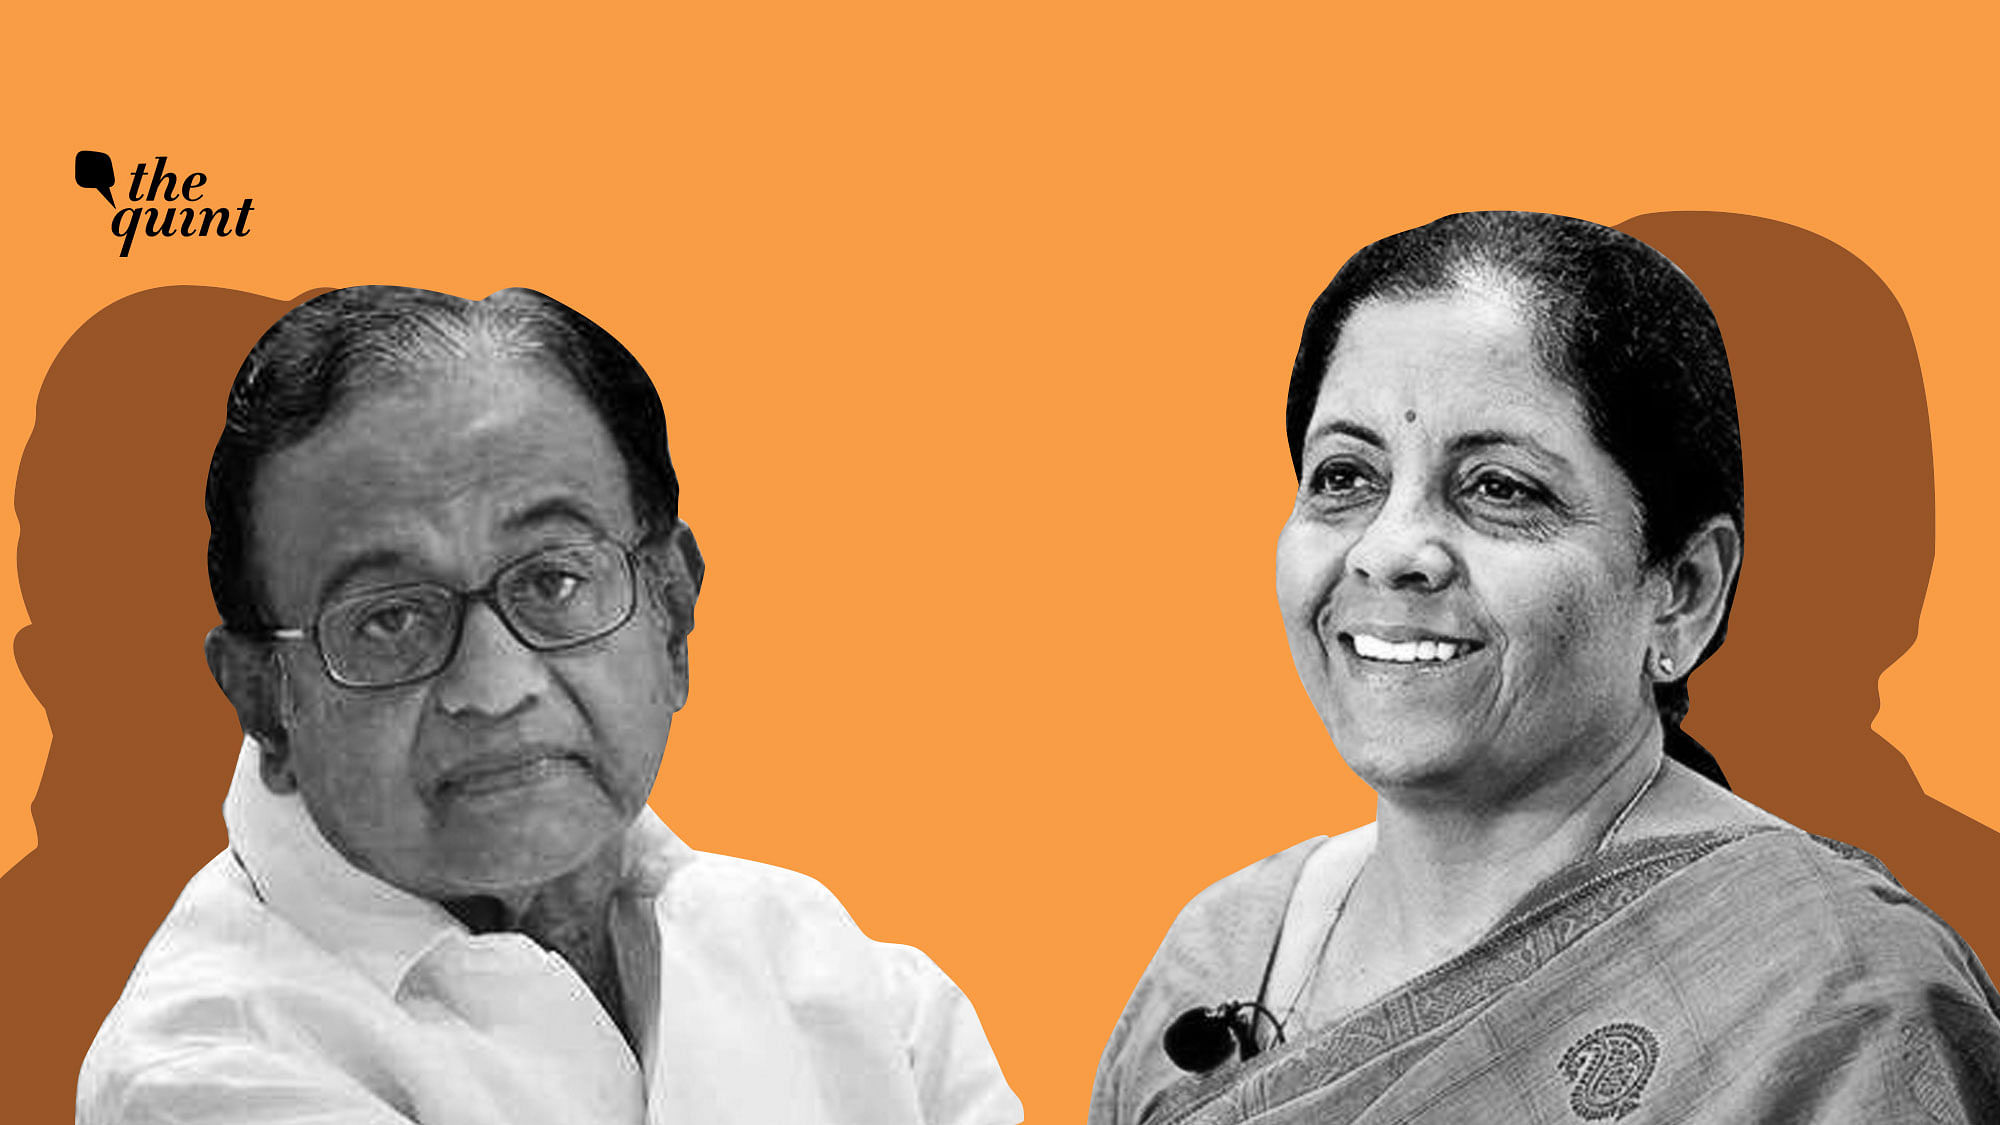 Chidambaram also took a dig at Finance Minister Nirmala Sitharaman for “dismissing suggestions with utter contempt.”